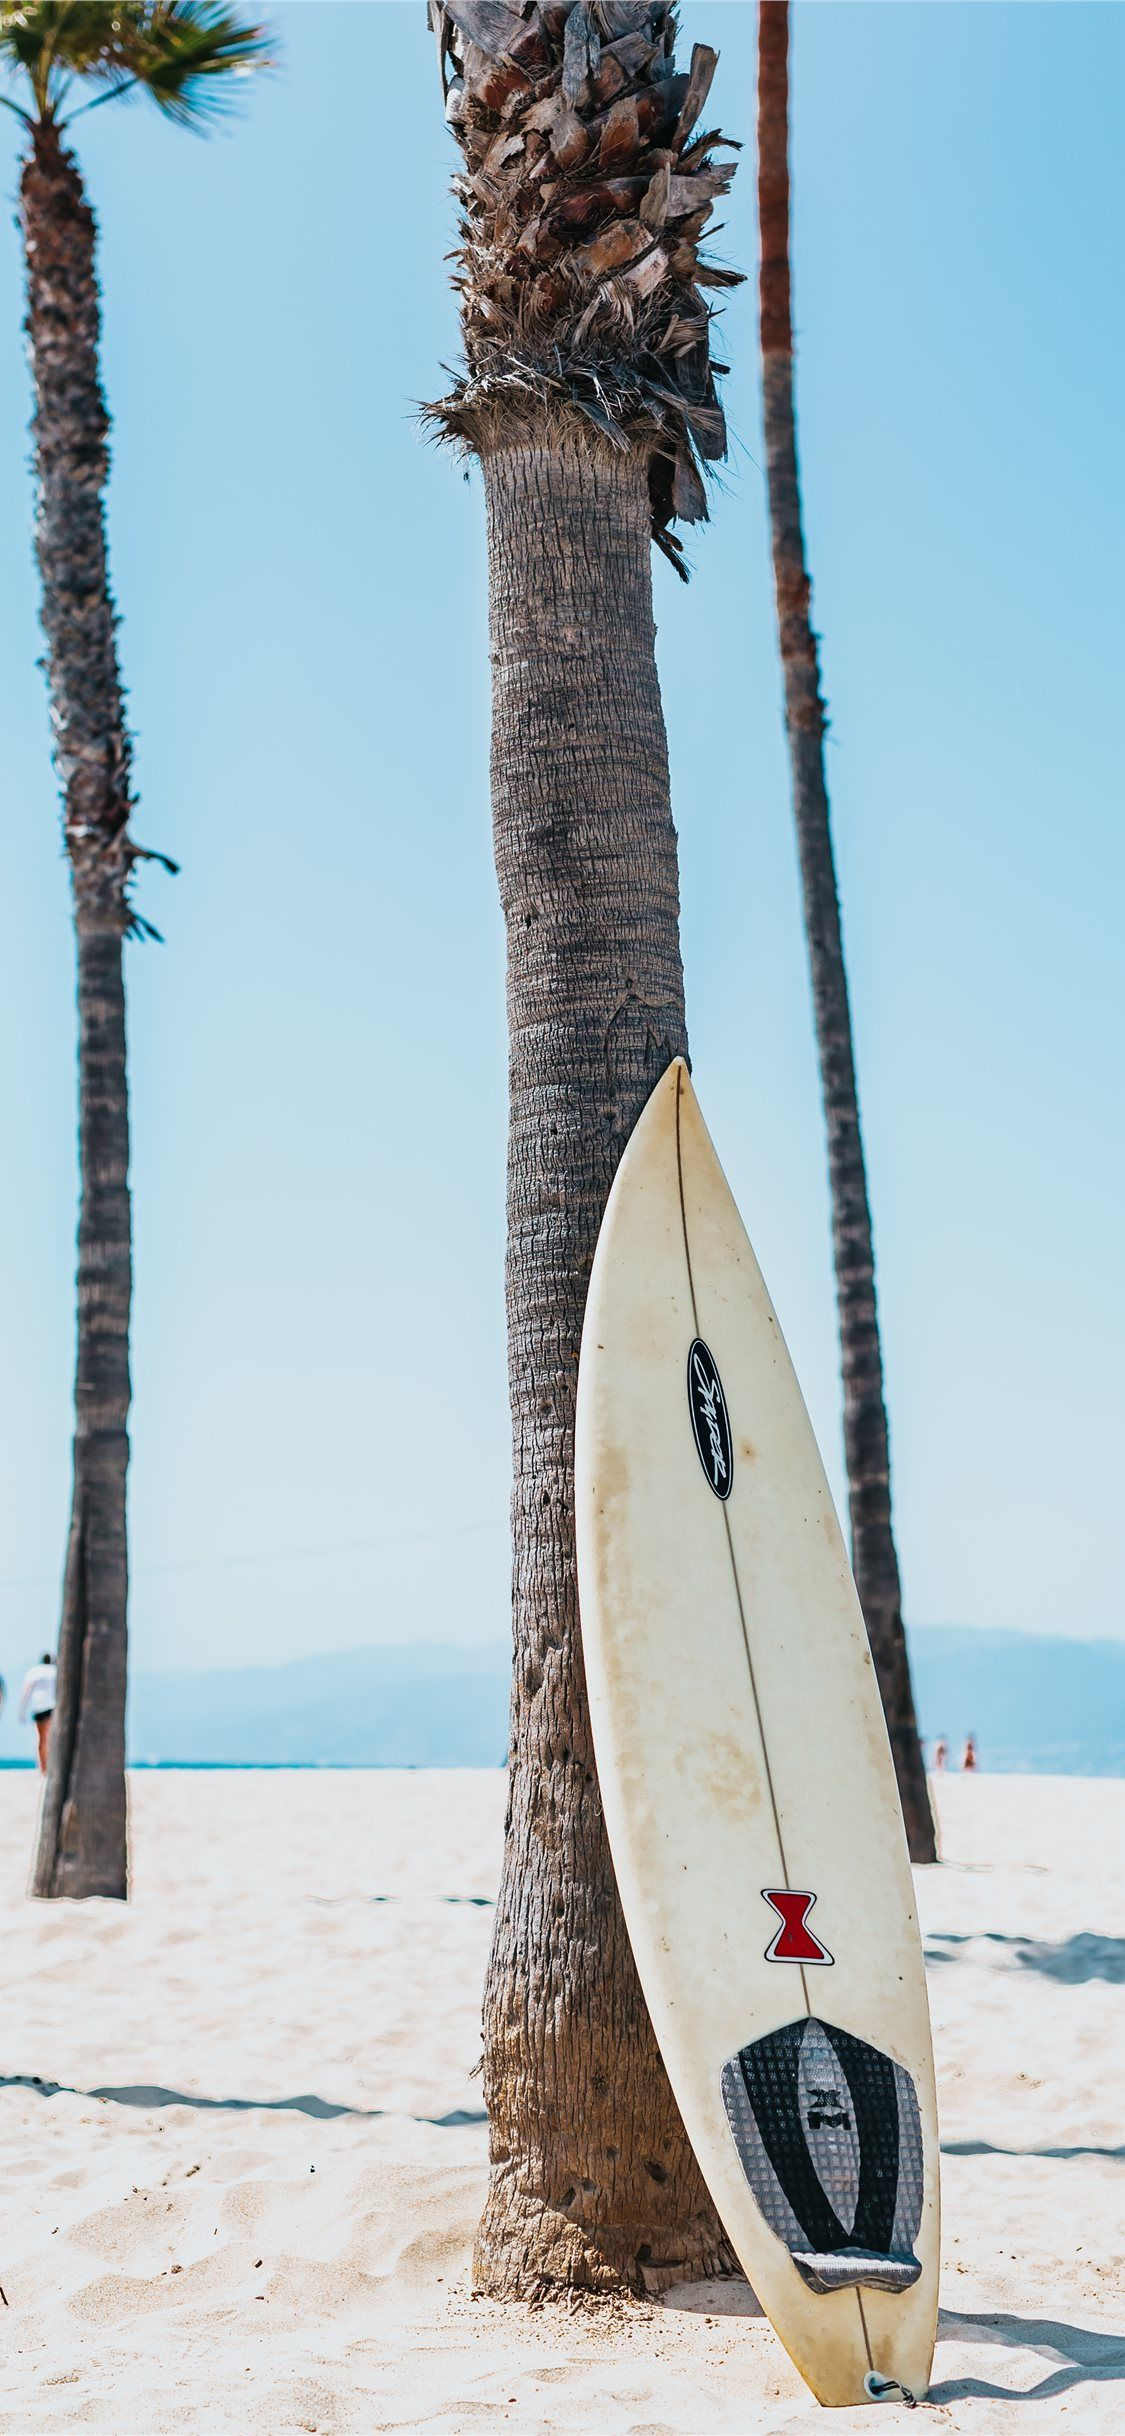 1125x2436 white and black surfboard leaning on gray Mexican ... #ocean #water #beach #palm-tree #nature | Surfing wallpaper, Beautiful ocean pictures, Beach background